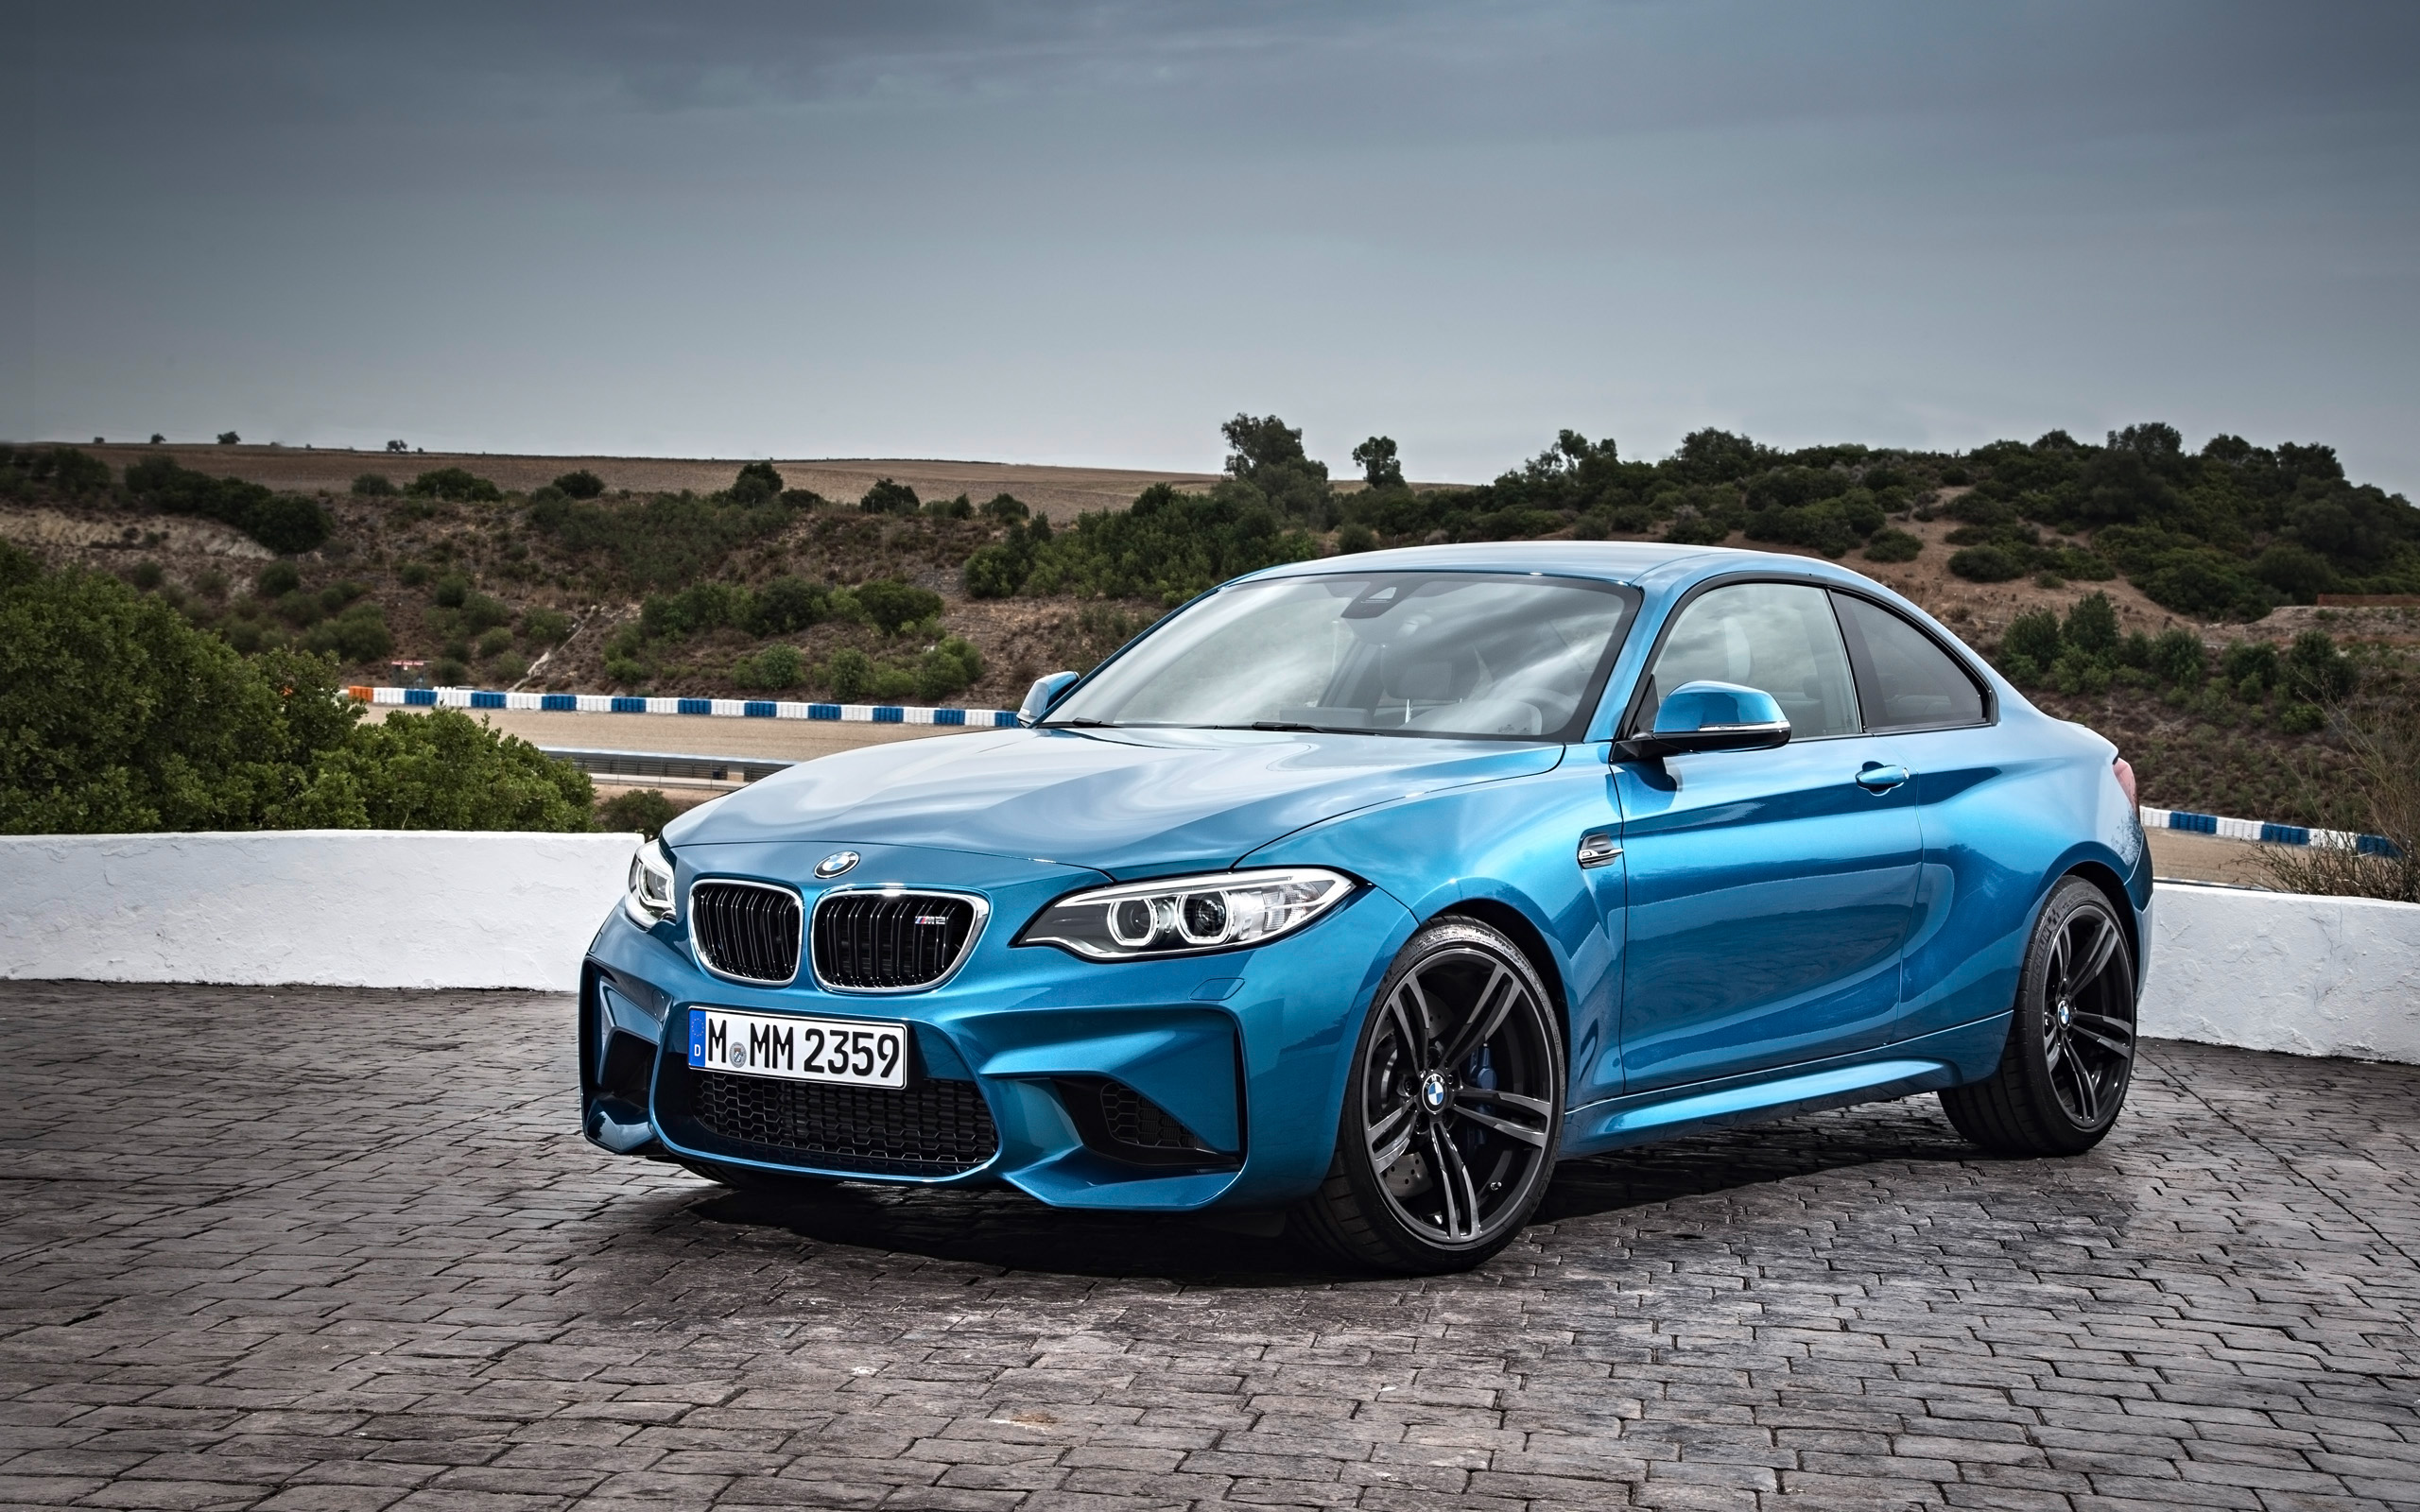 2016 Bmw M2 Coupe Wallpaper Hd Car Wallpapers Id 5857